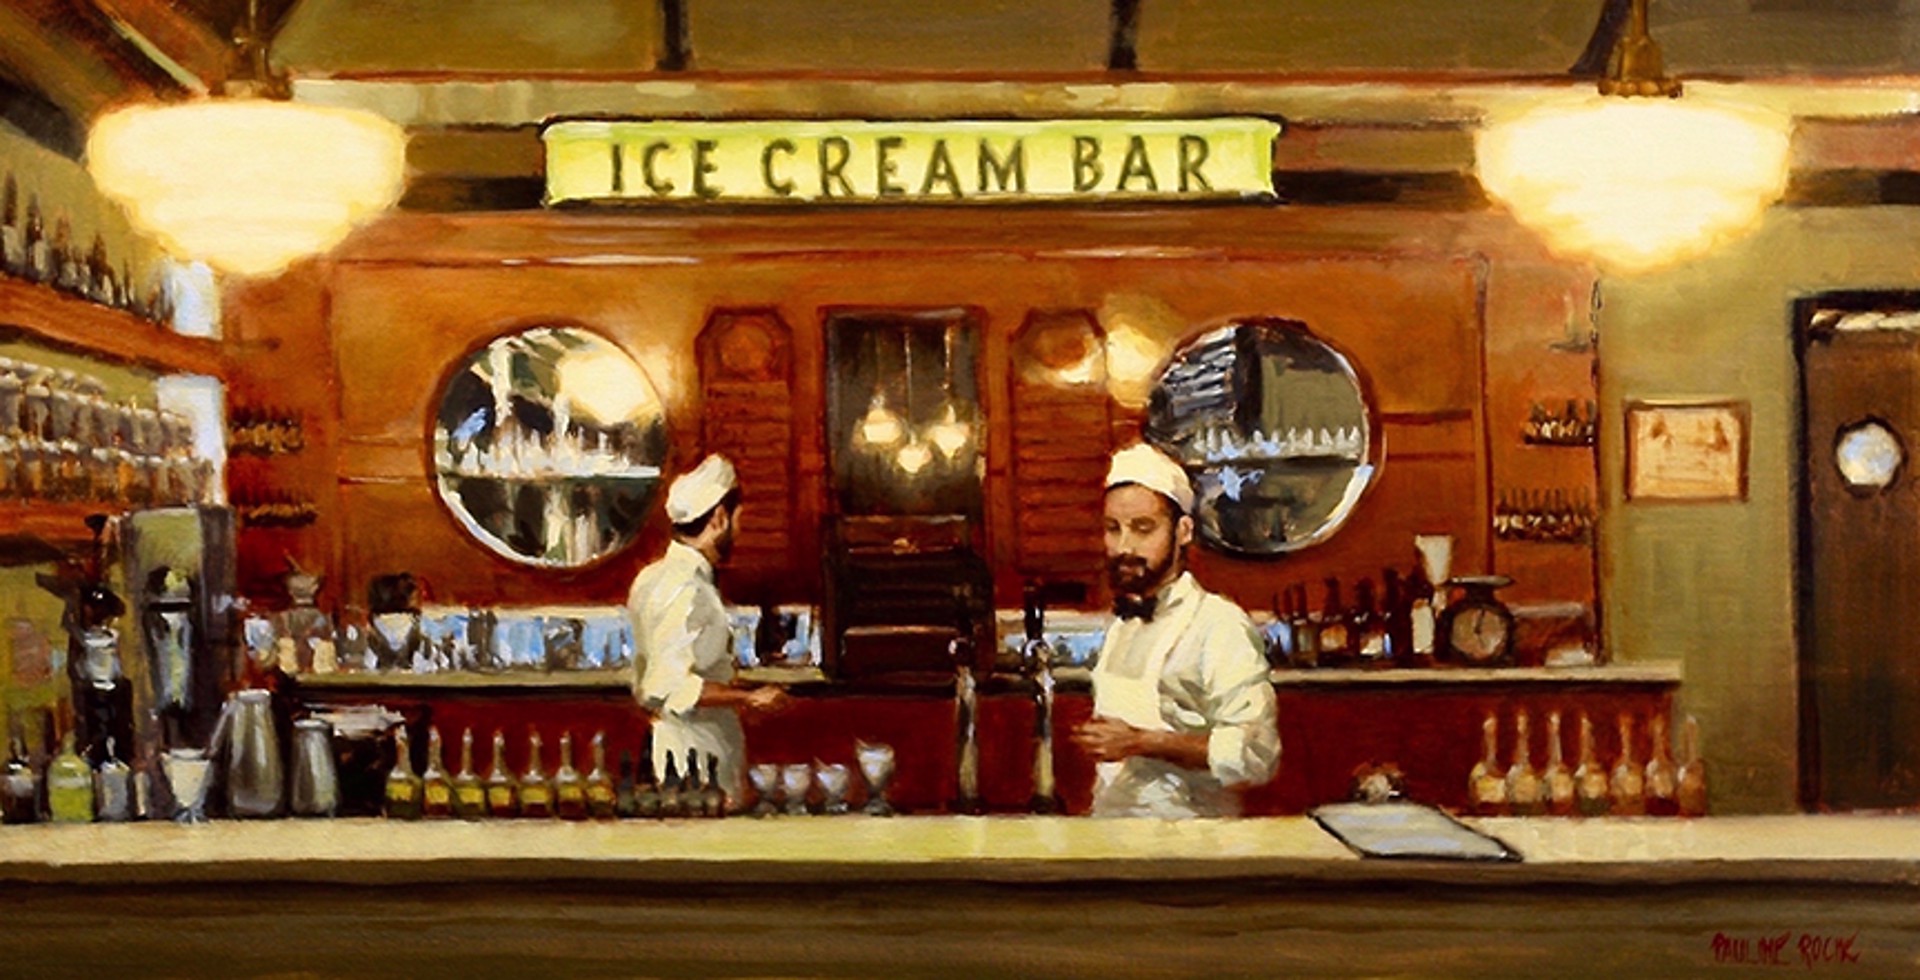 Servers at the Ice Cream Bar by Pauline Roche